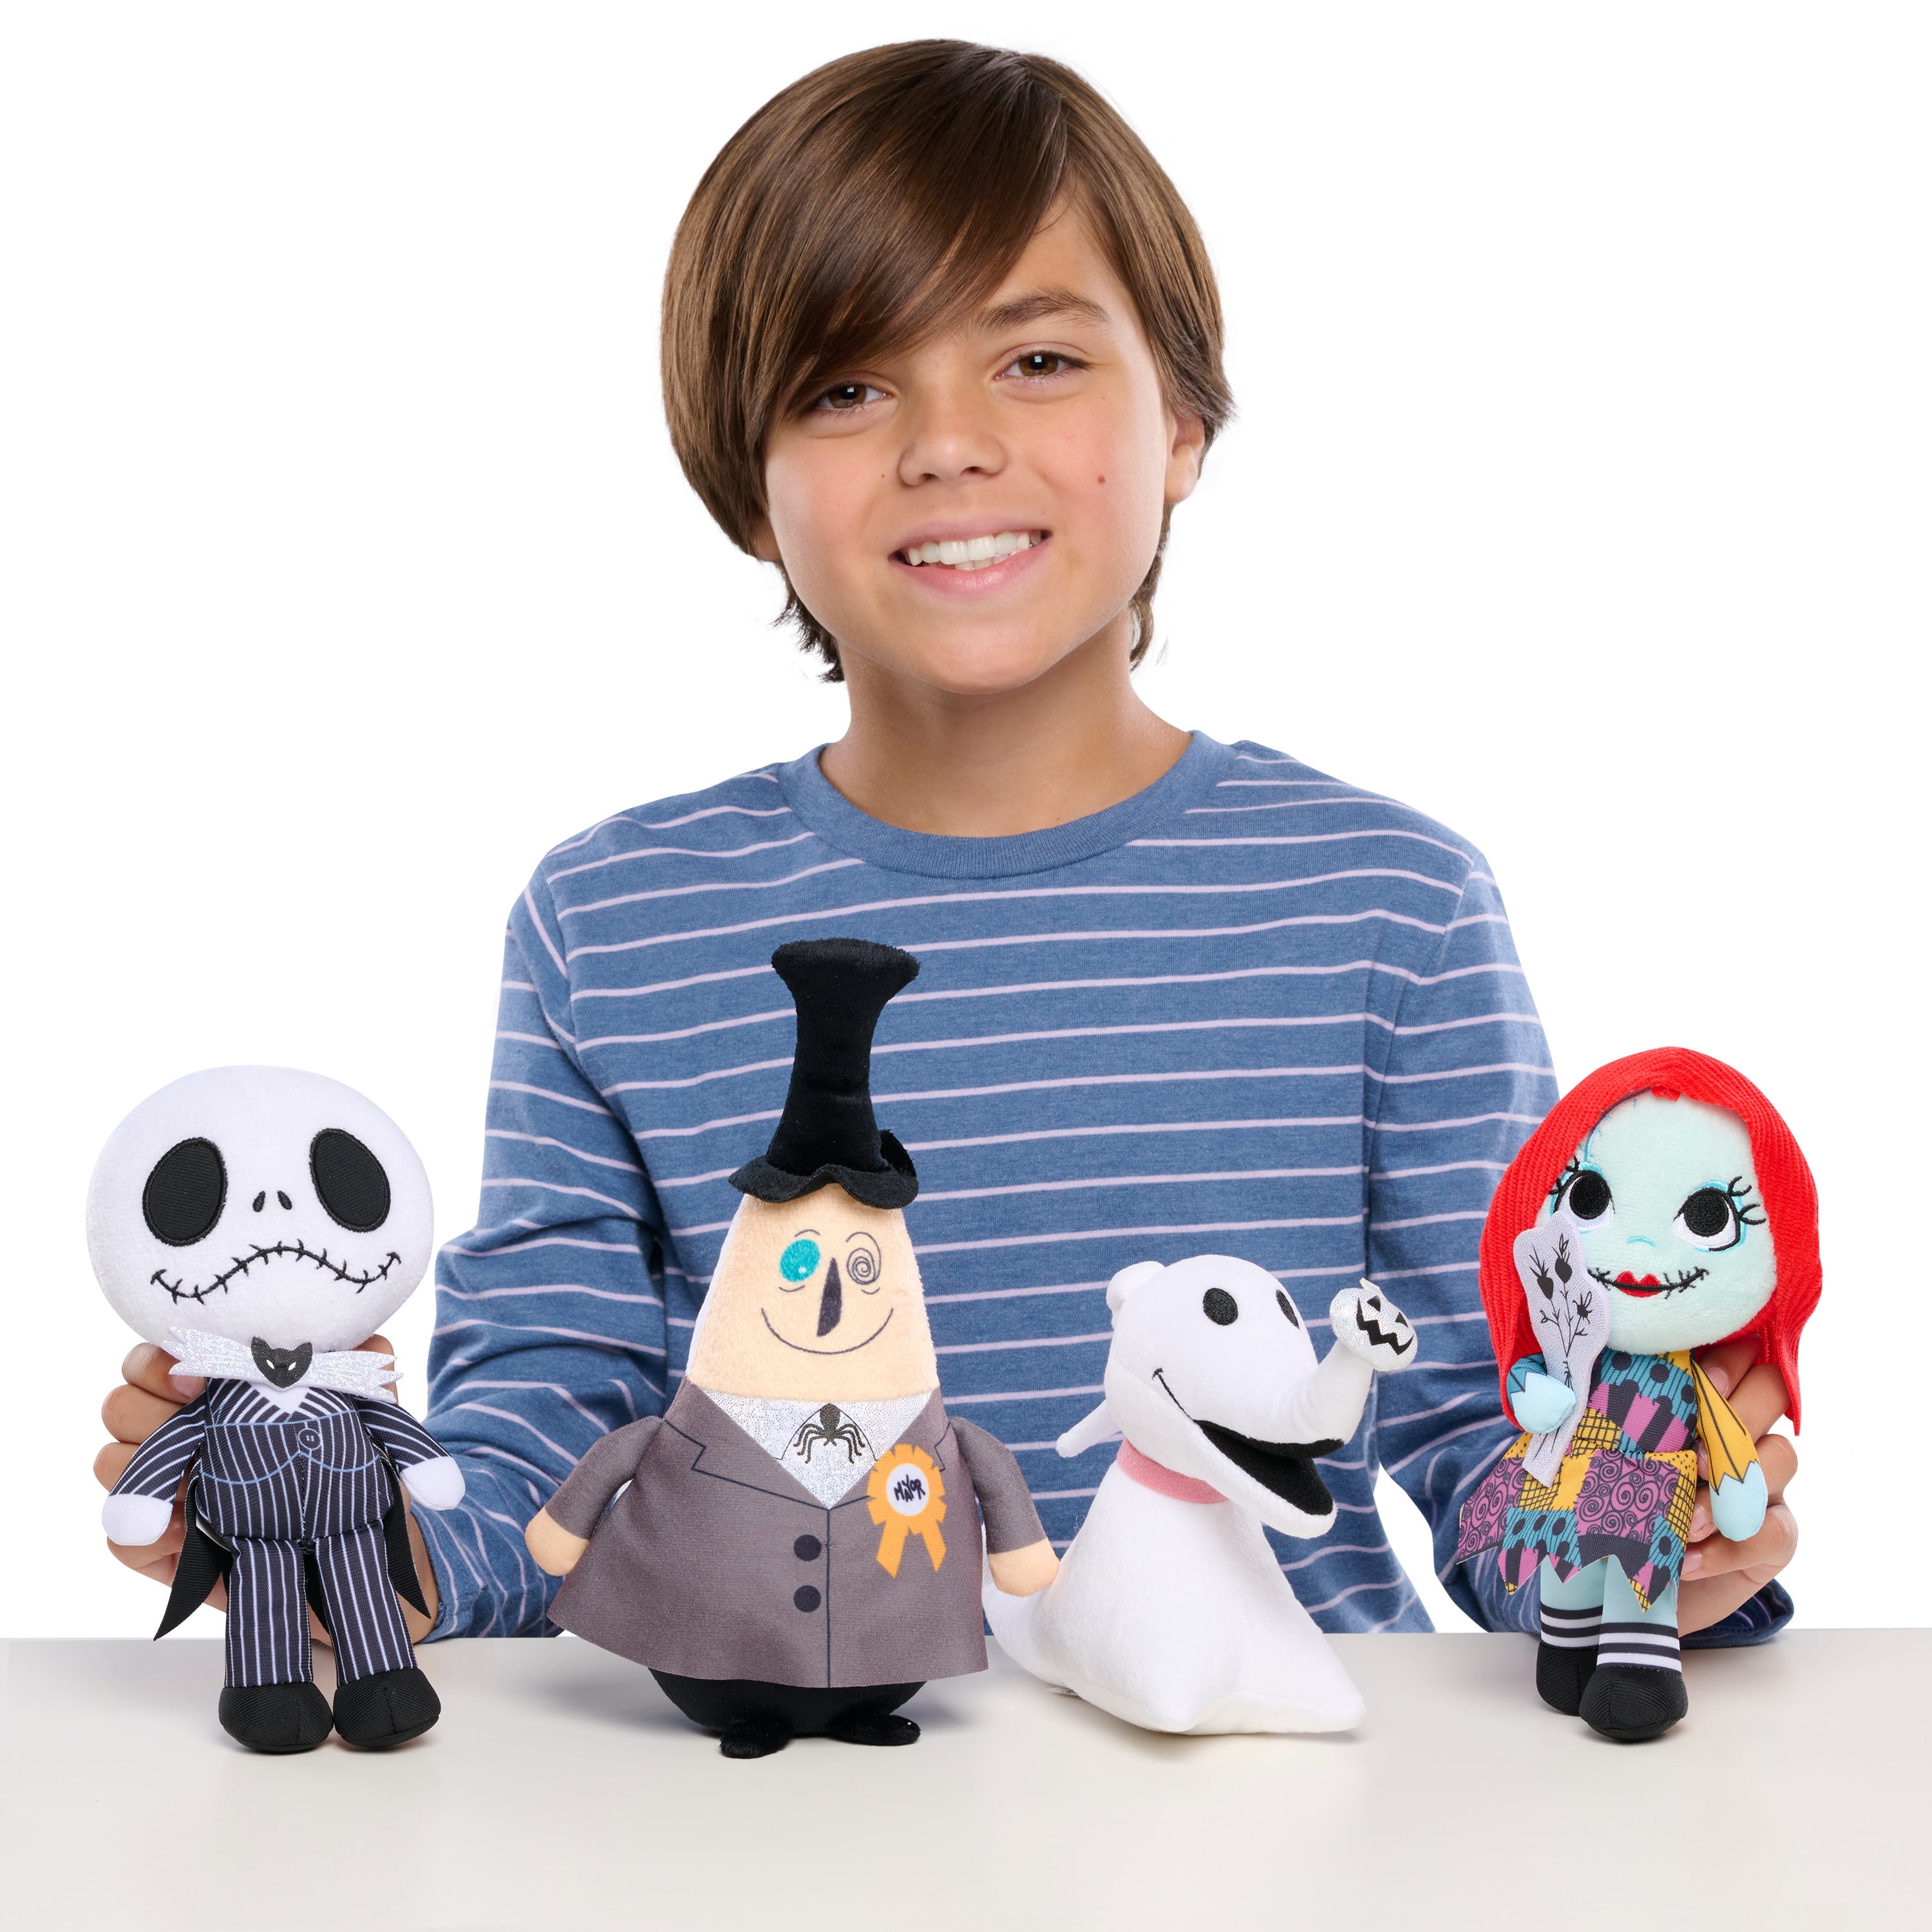 Set, for Nightmare Ages Toys Disney Plush Christmas Kids Before The Disney100 up 4-piece 3 Tim Burton\'s Collector